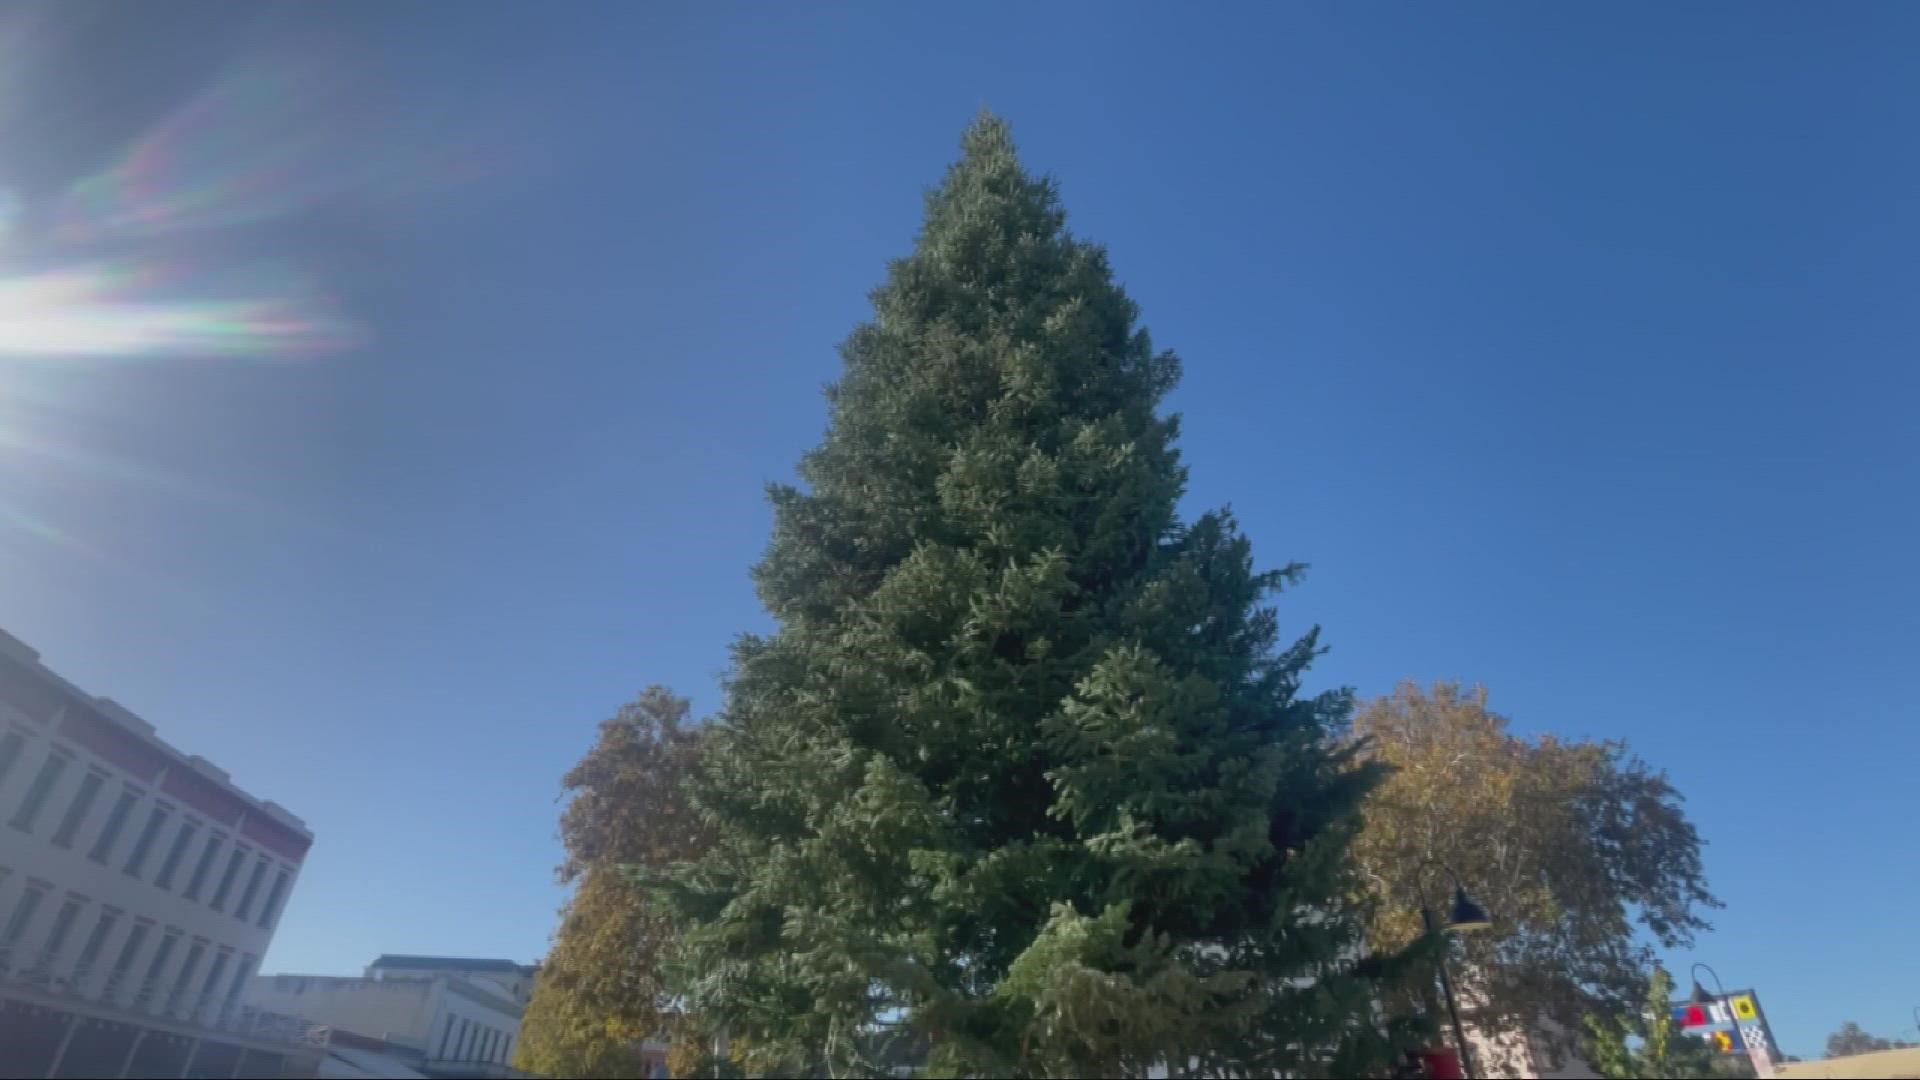 The tallest Christmas tree in the Sacramento region arrived in Old Sacramento Monday morning from Shasta County.